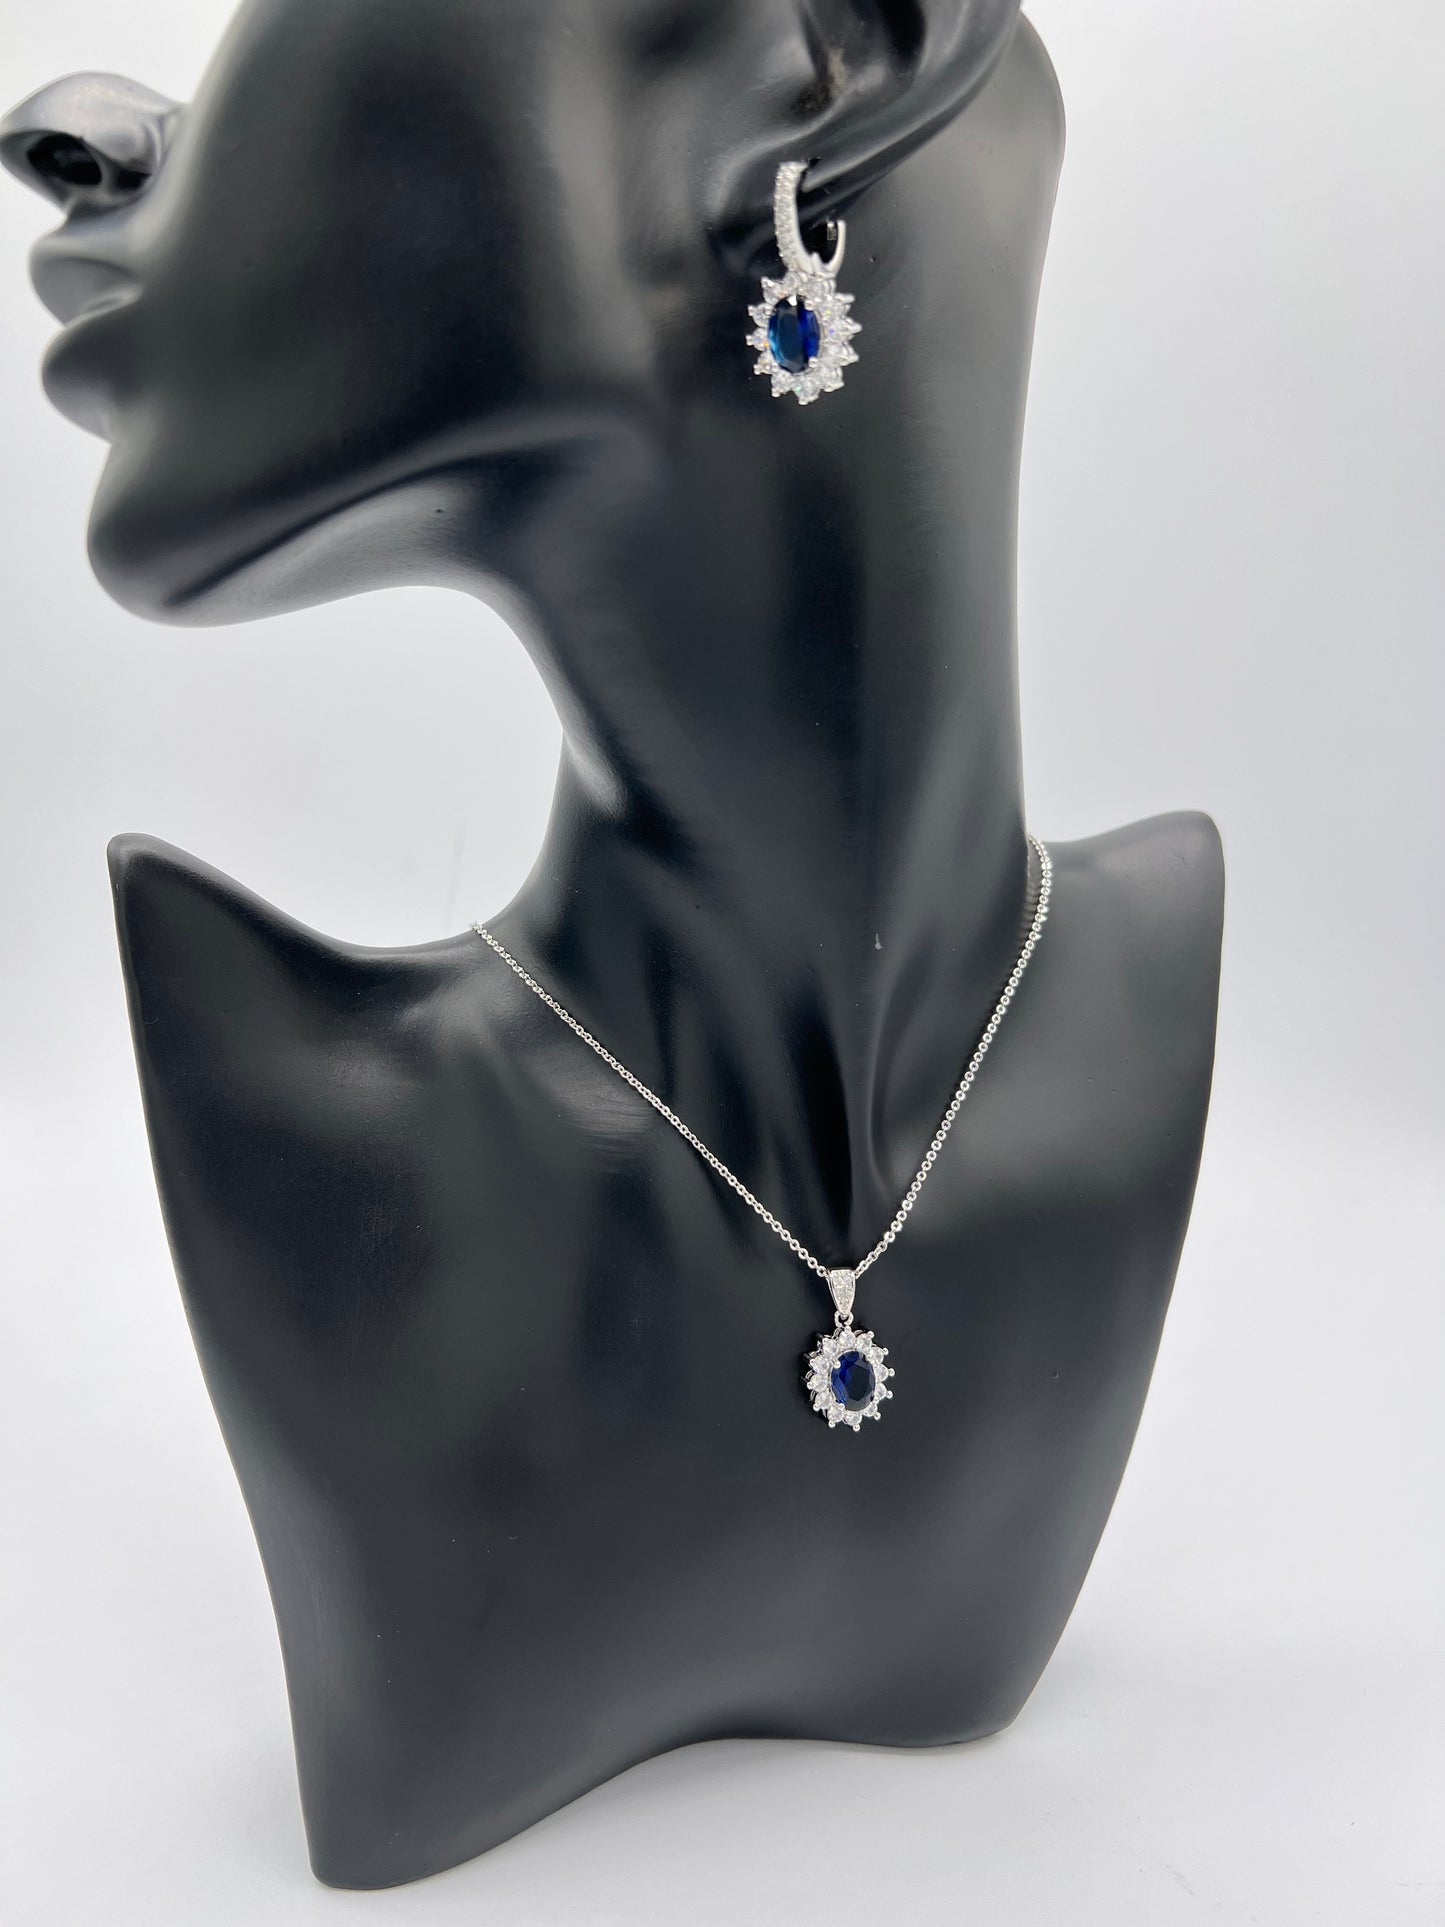 classic design earring and necklace set in sapphire color main oval zircon surrounding by white cubic zircons